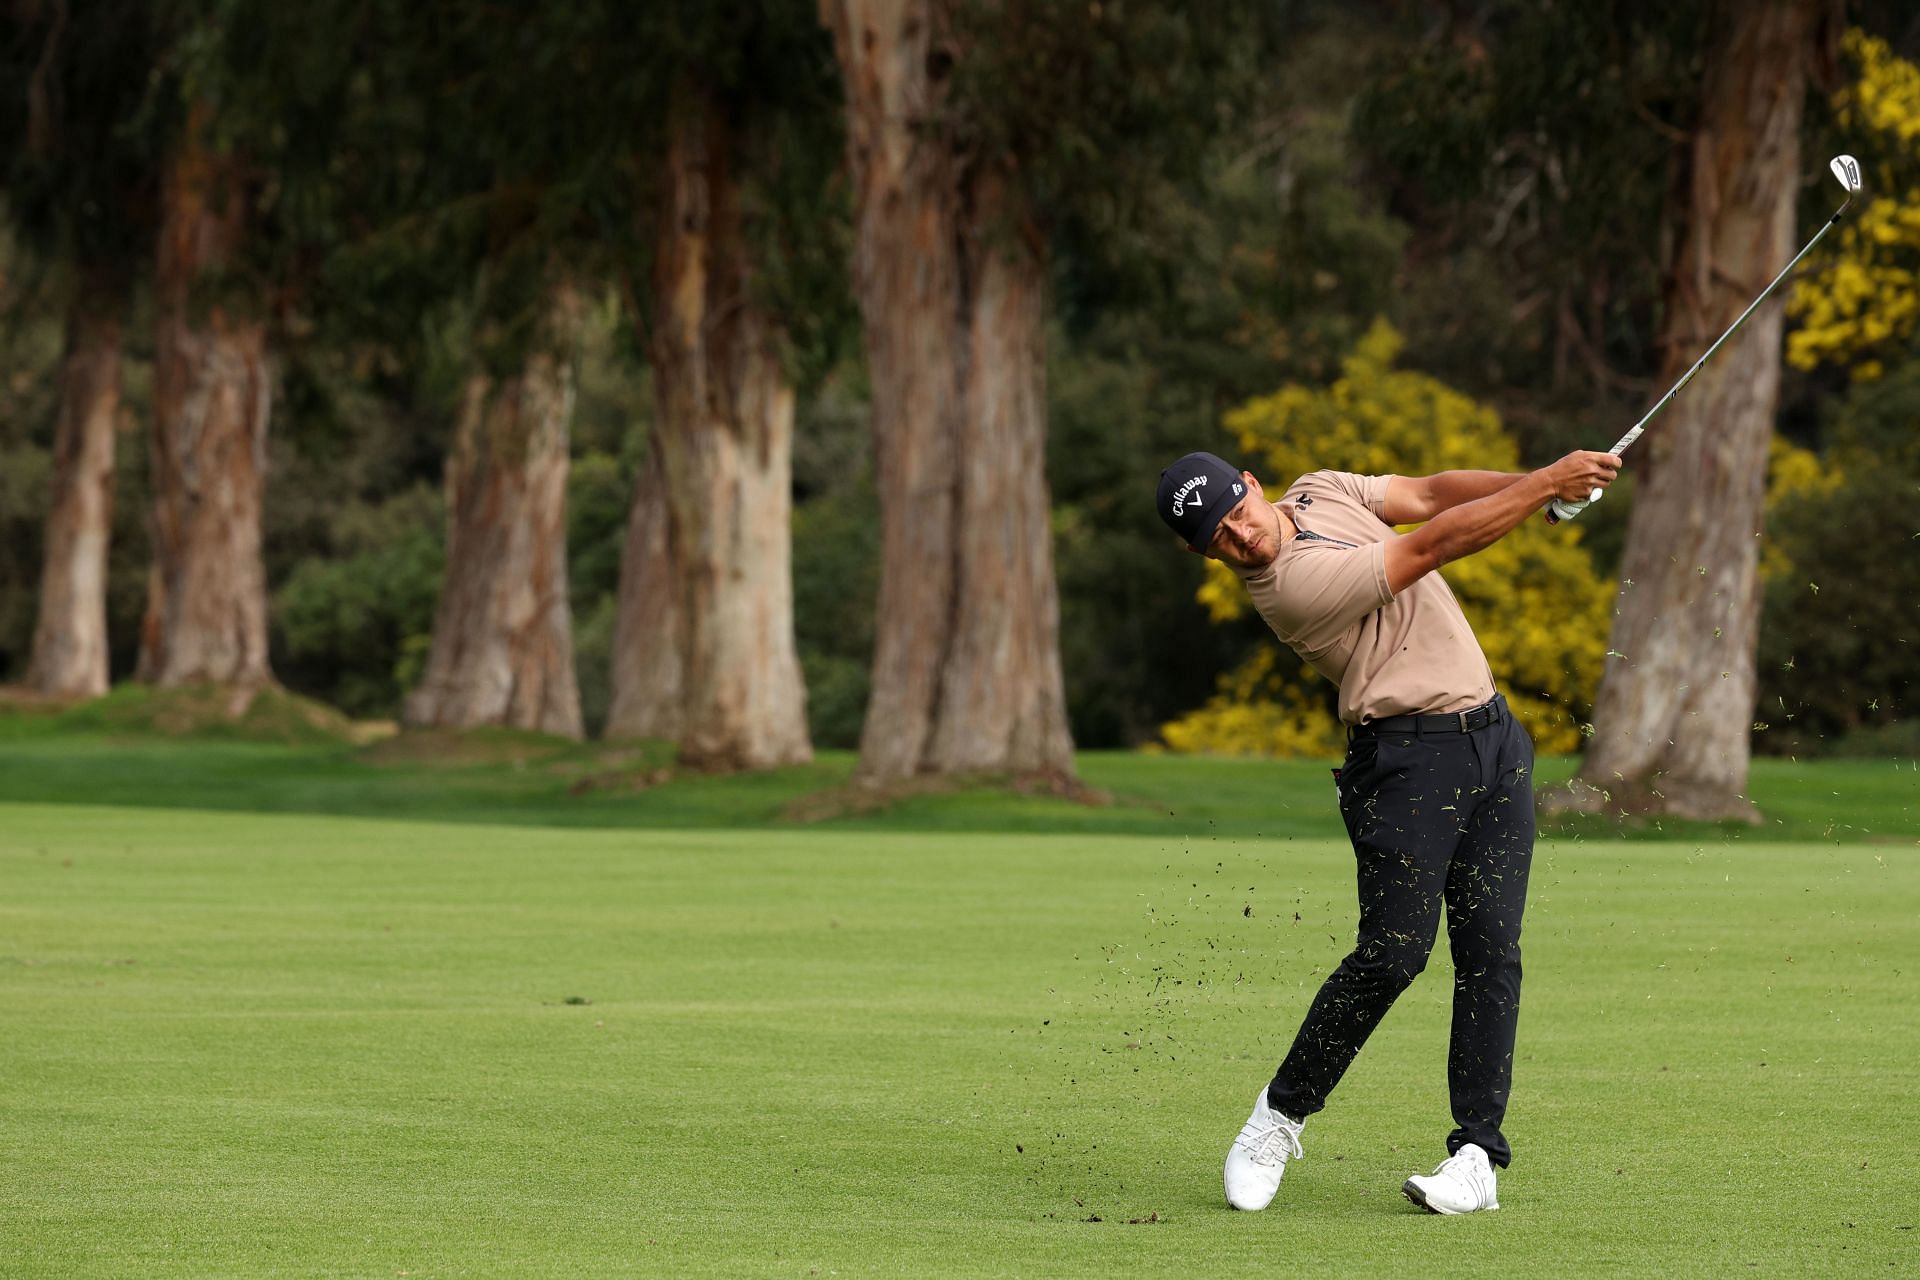 Xander Schauffele plays a second shot on the 13th hole during the final round of The Genesis Invitational